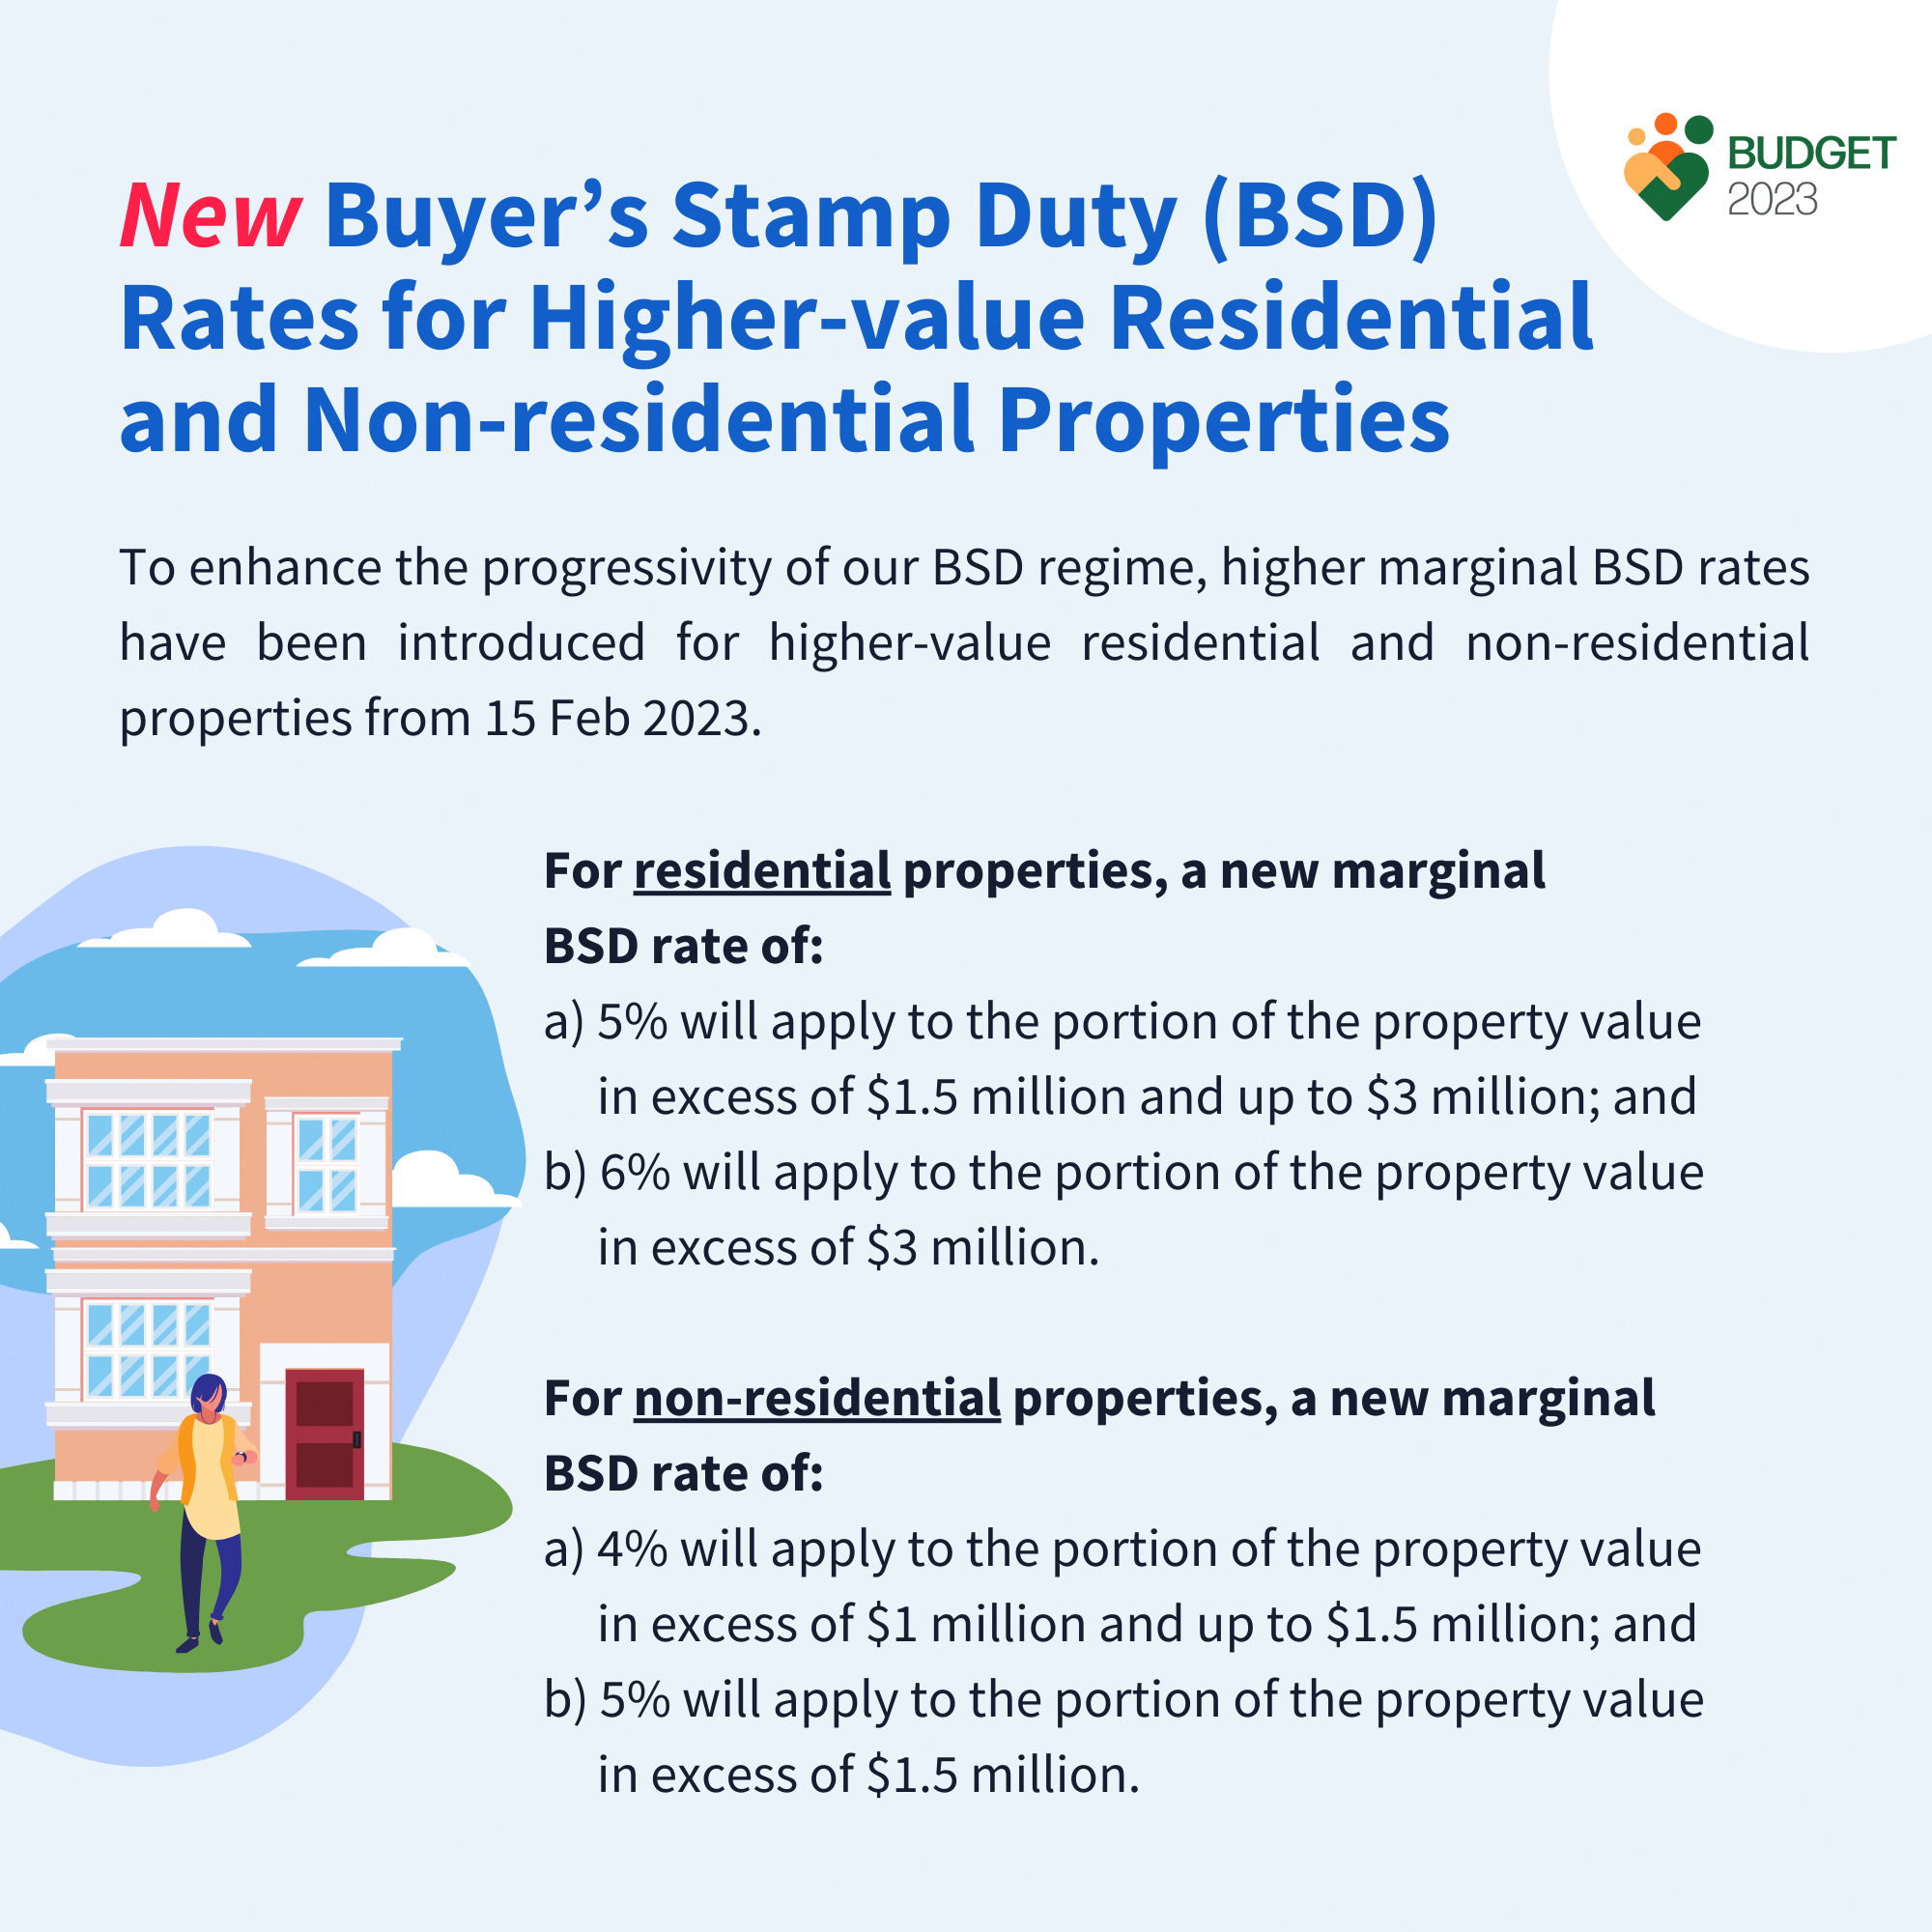 From 15 Feb 2023, the top marginal rate for residential properties is 6%, and the top marginal rate for non-residential properties is 5%.